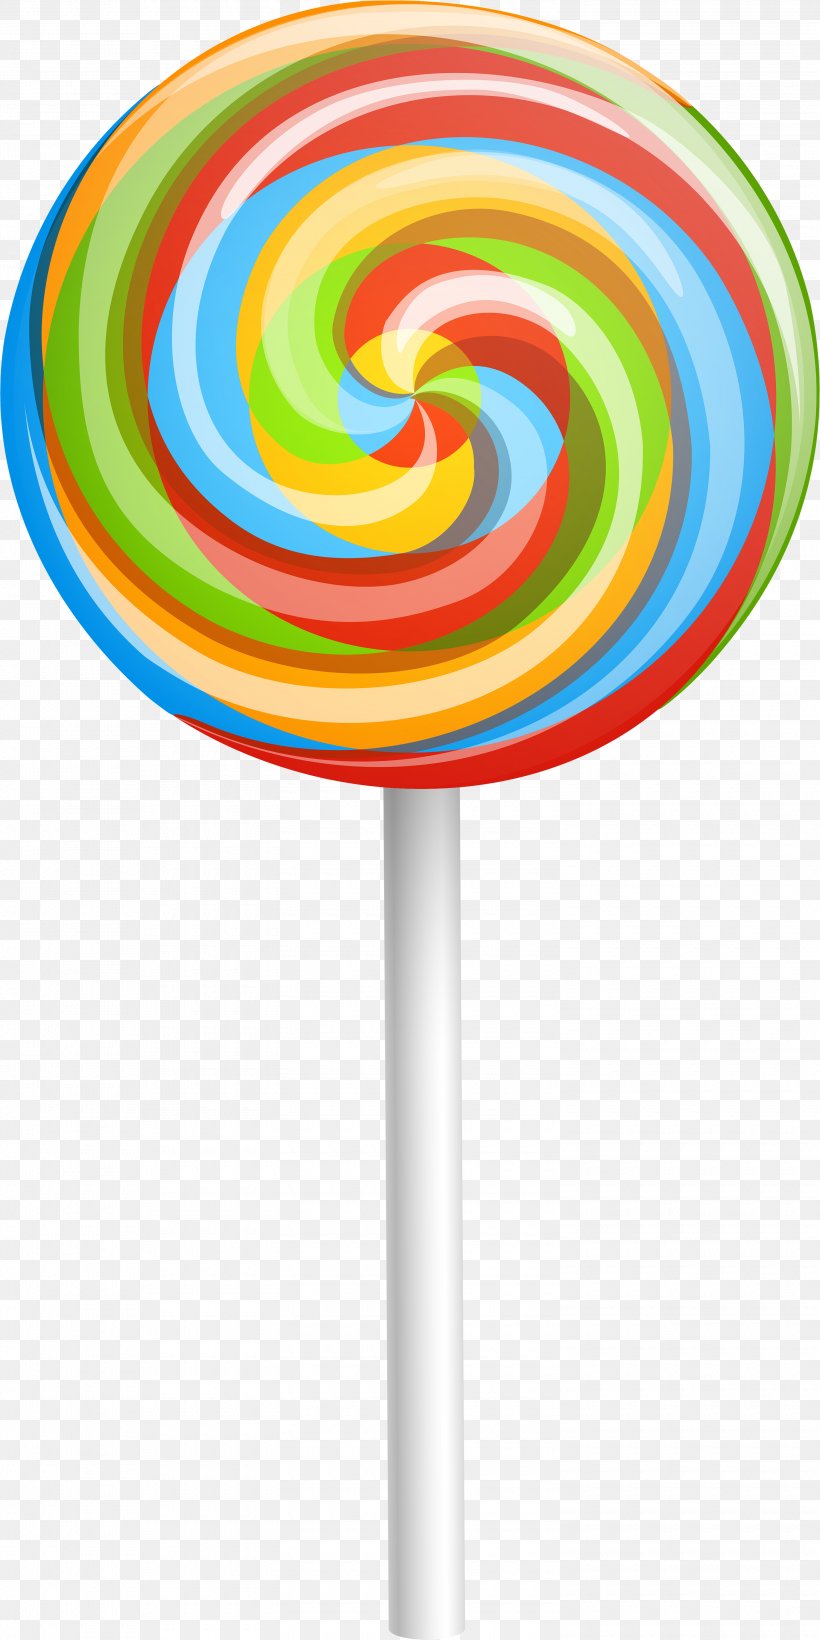 Lollipop Candy Clip Art, PNG, 3000x6000px, Lollipop, Candy, Chupa Chups, Confectionery, Food Download Free